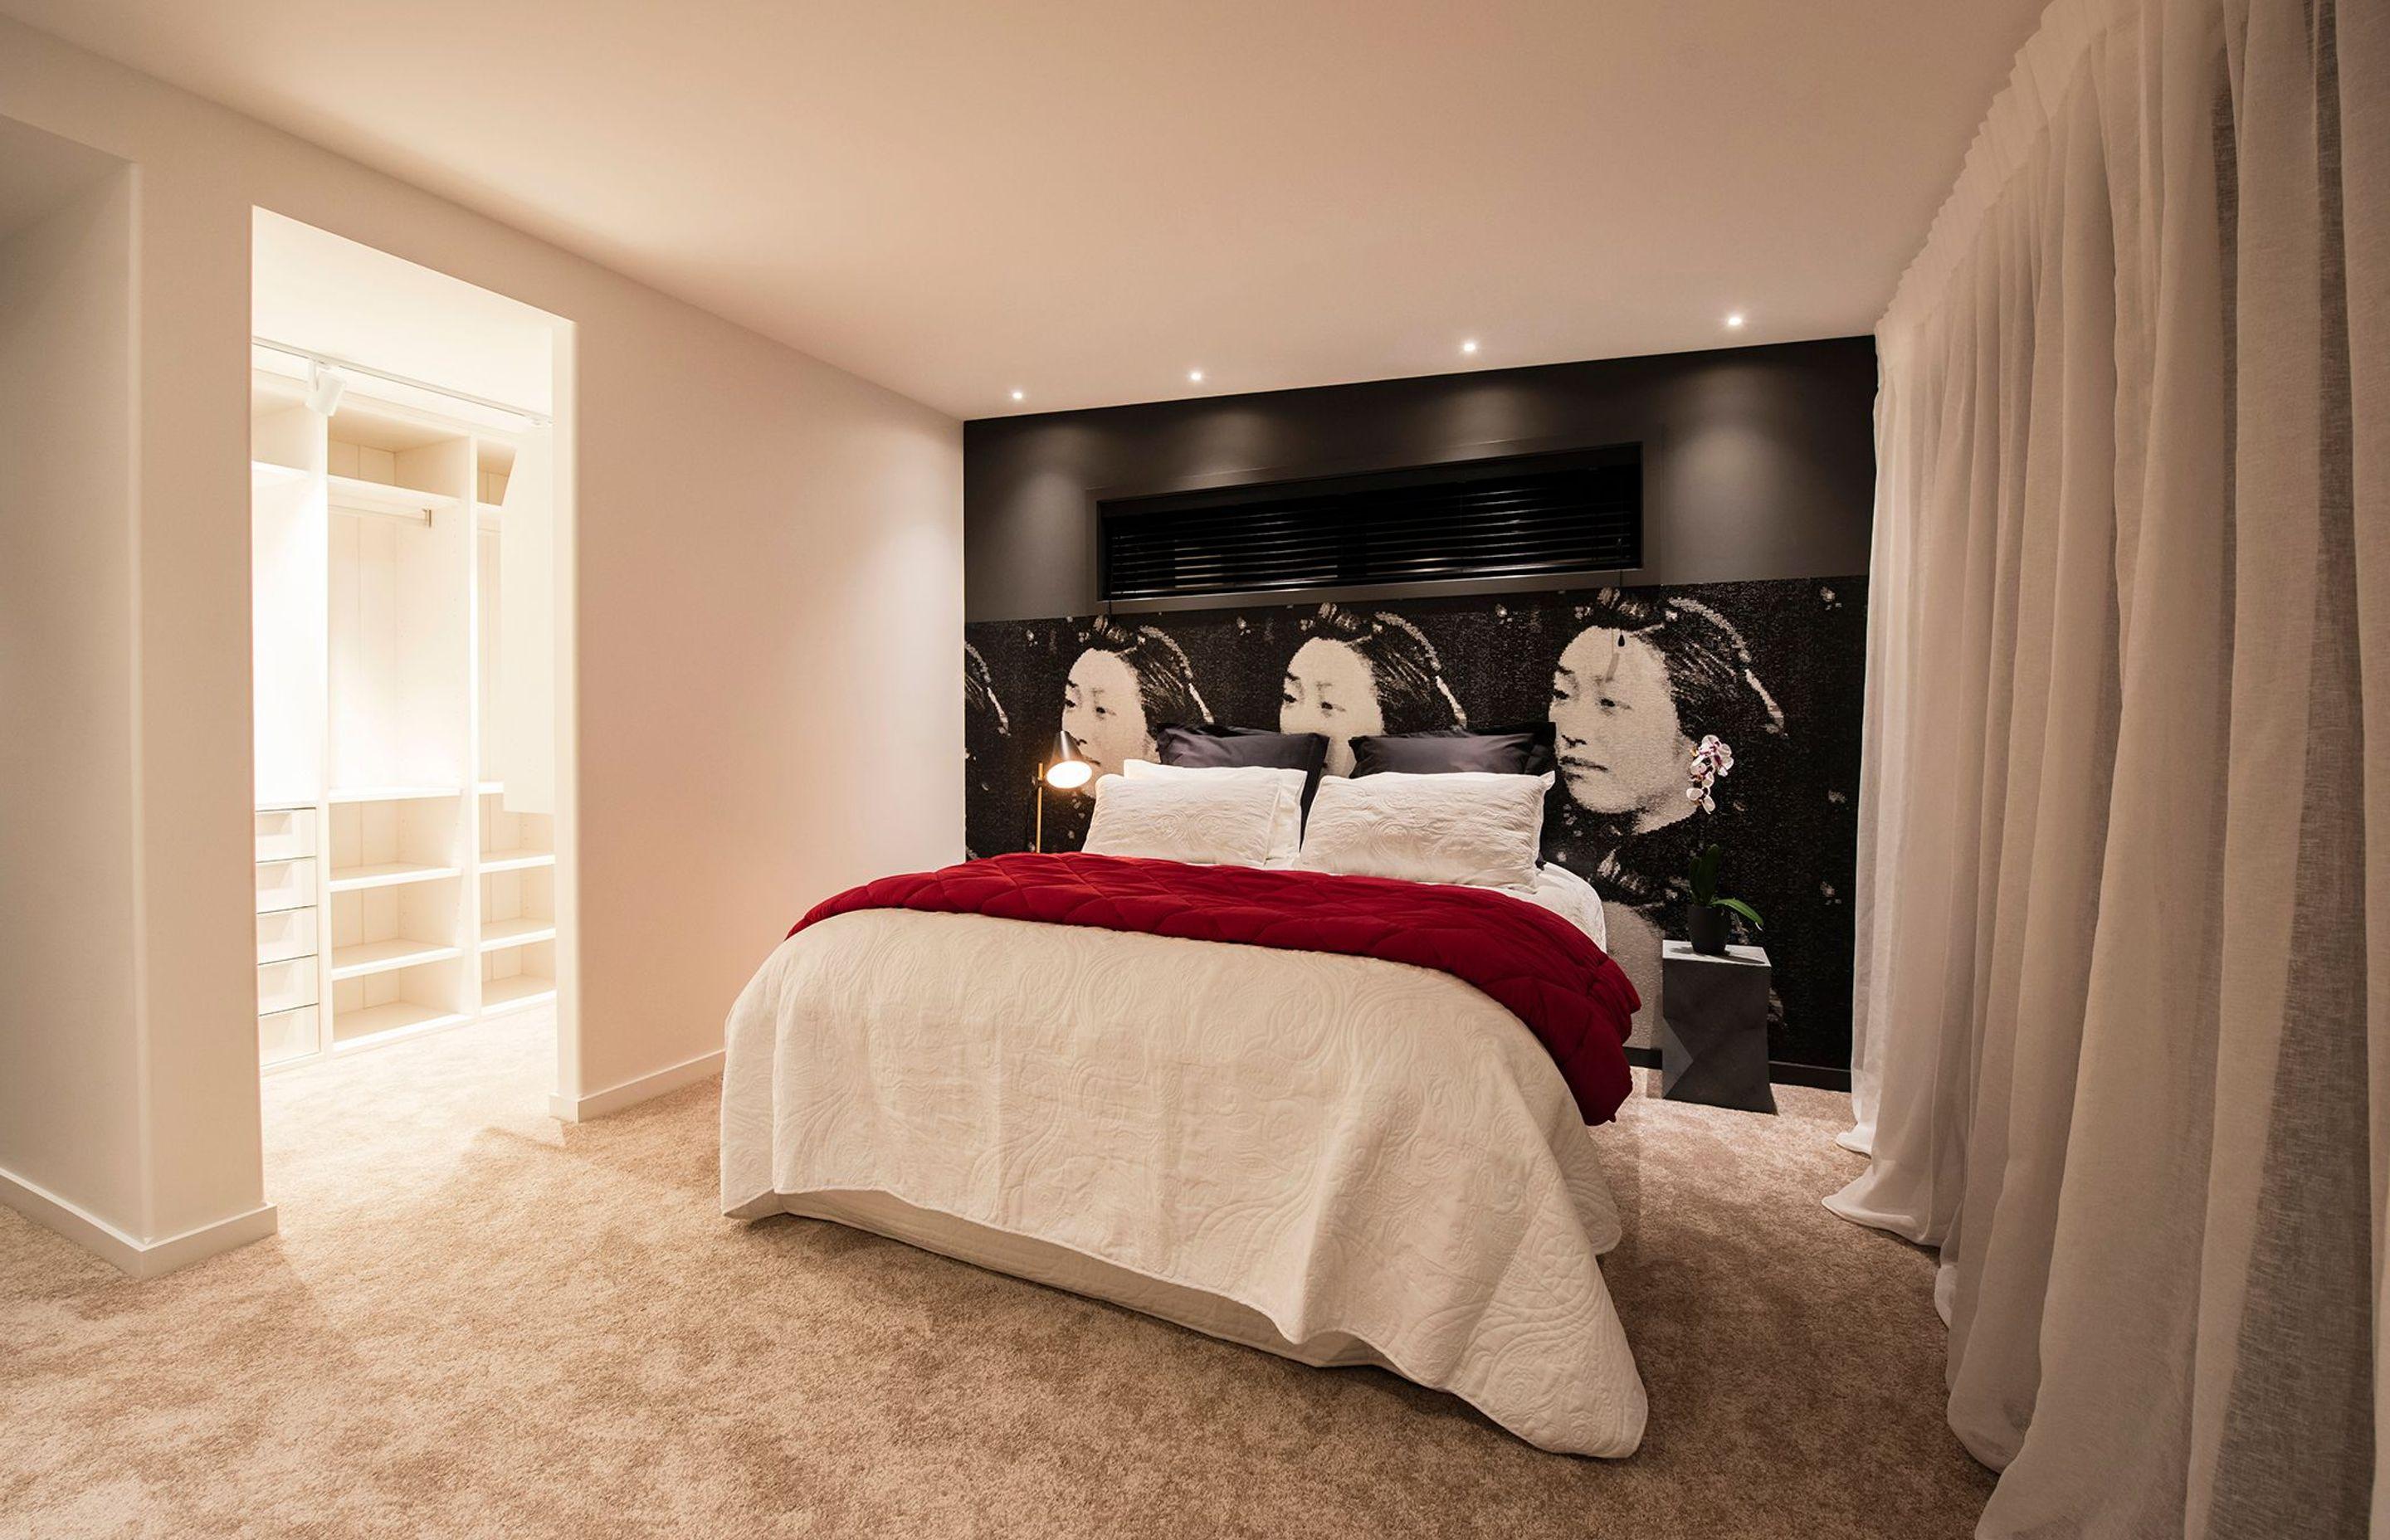 A mural of a Japanese lady is the unconventional backdrop to the bed in the main suite.